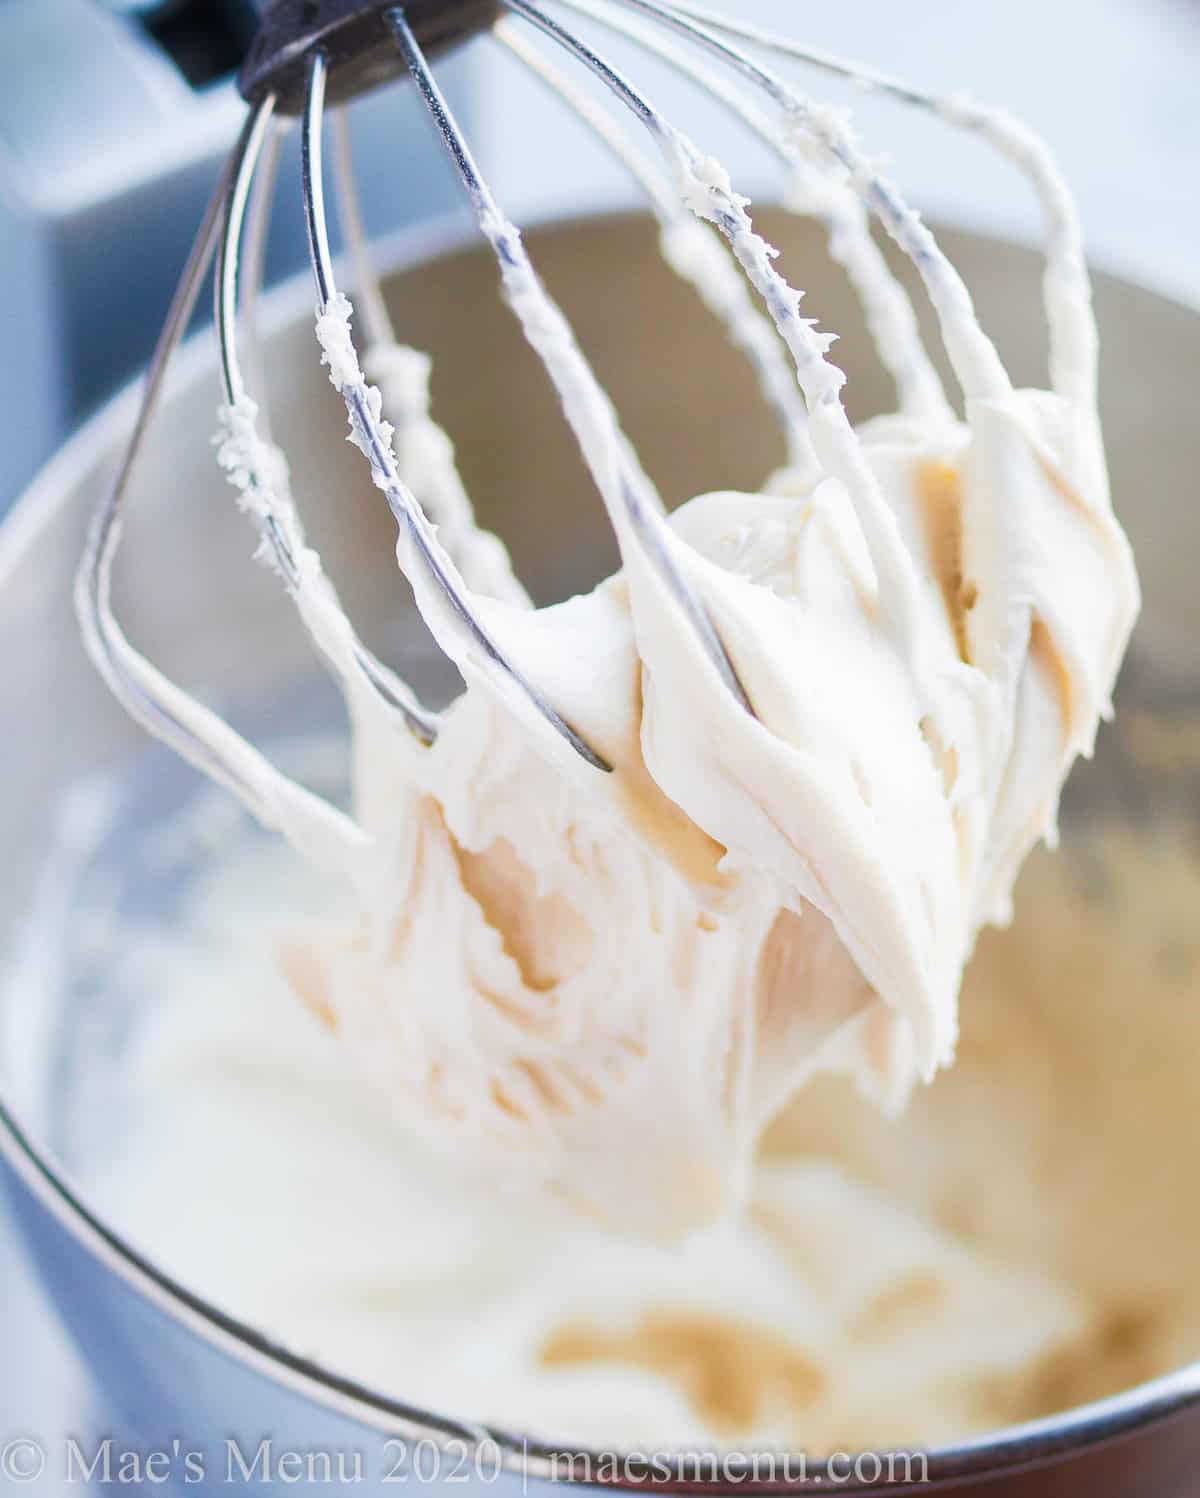 Whisk of a stand mixer covered in cream cheese frosting.